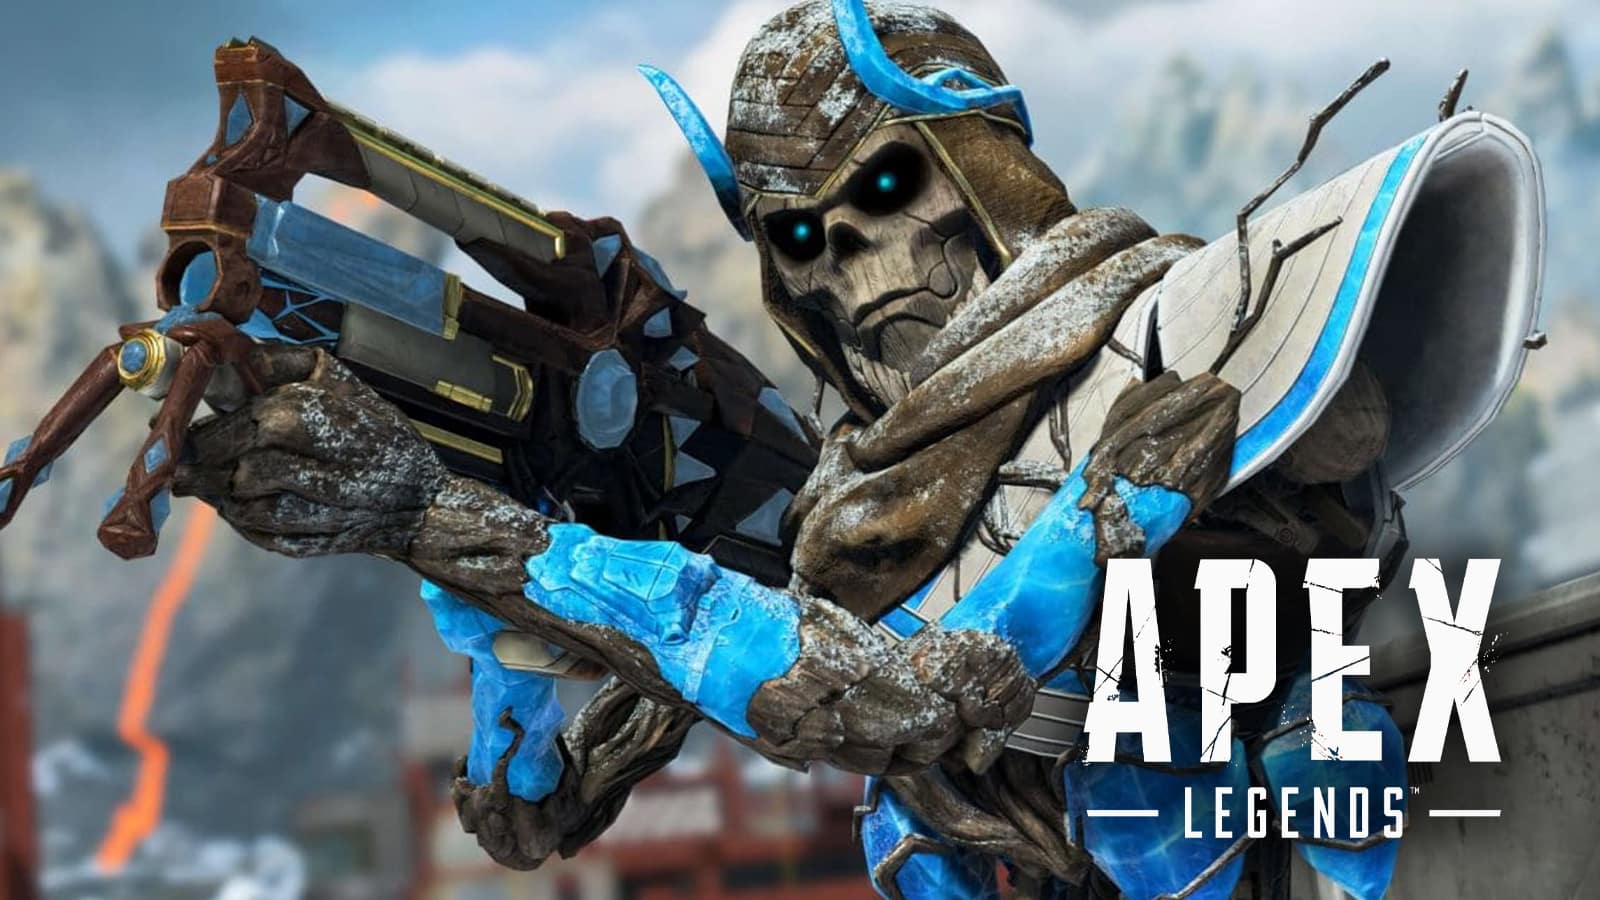 Revenant holding the C.A.R SMG from Titanfall that is arriving in Apex in Season 11